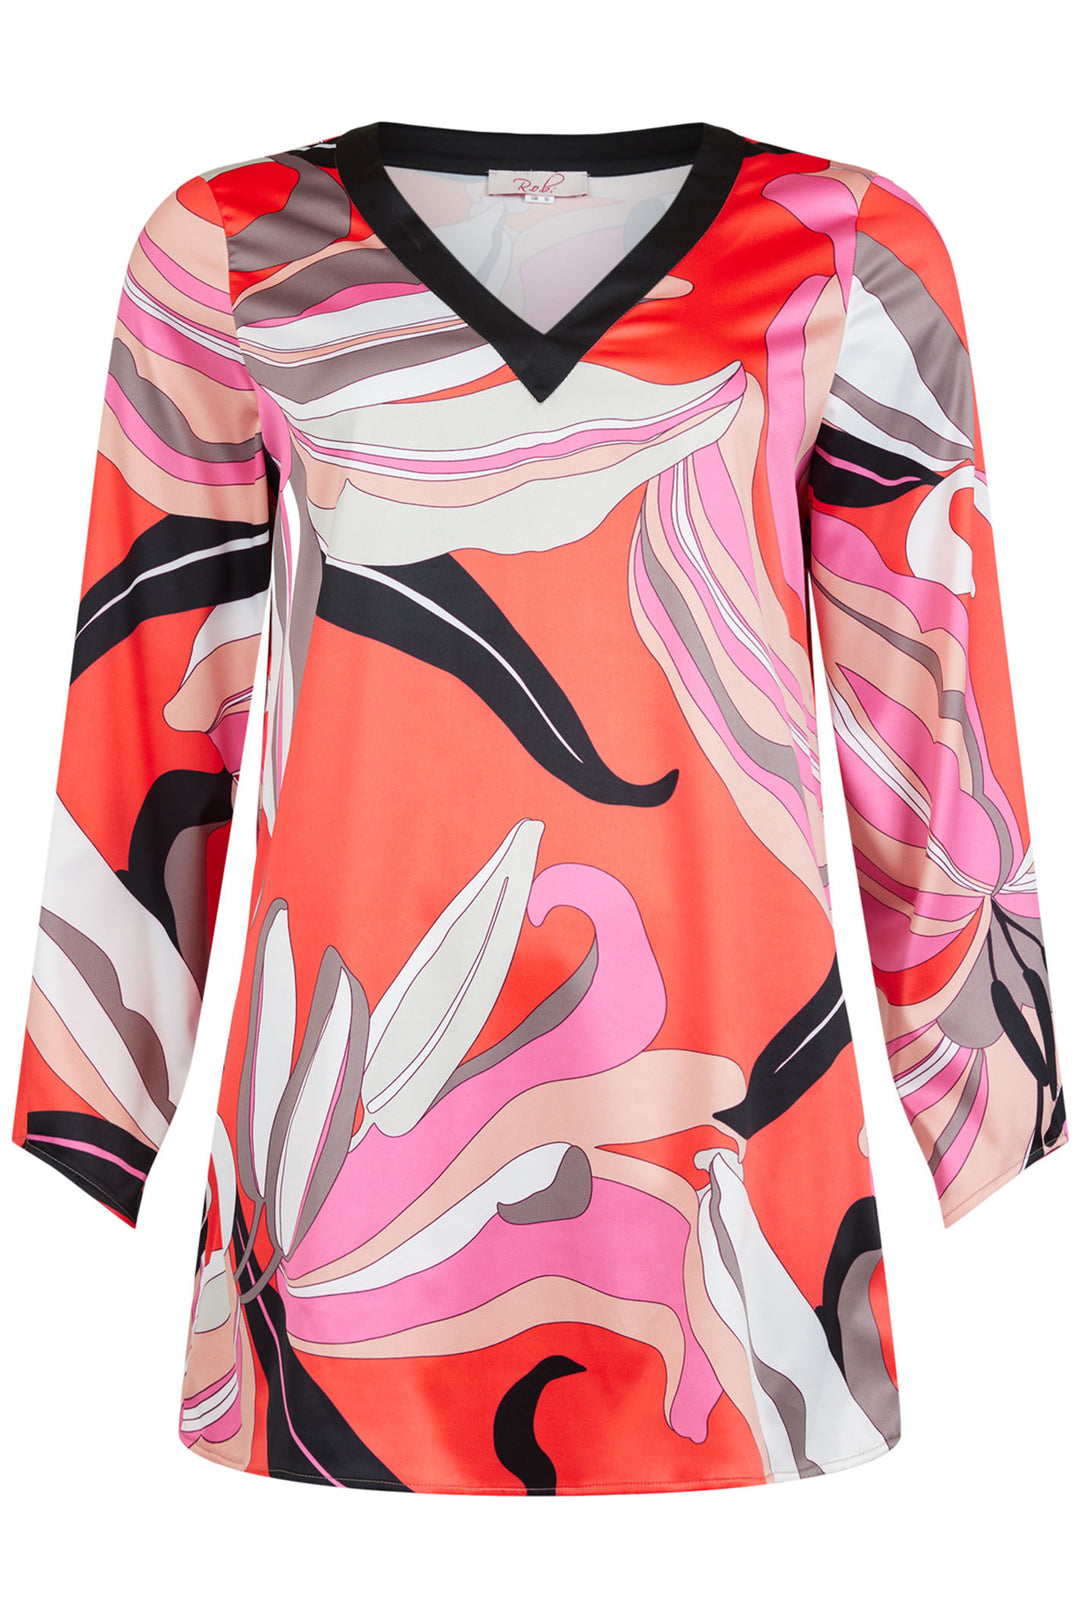 Robell R.O.B 54407 33 Red Lily Print Satin Top - Experience Boutique